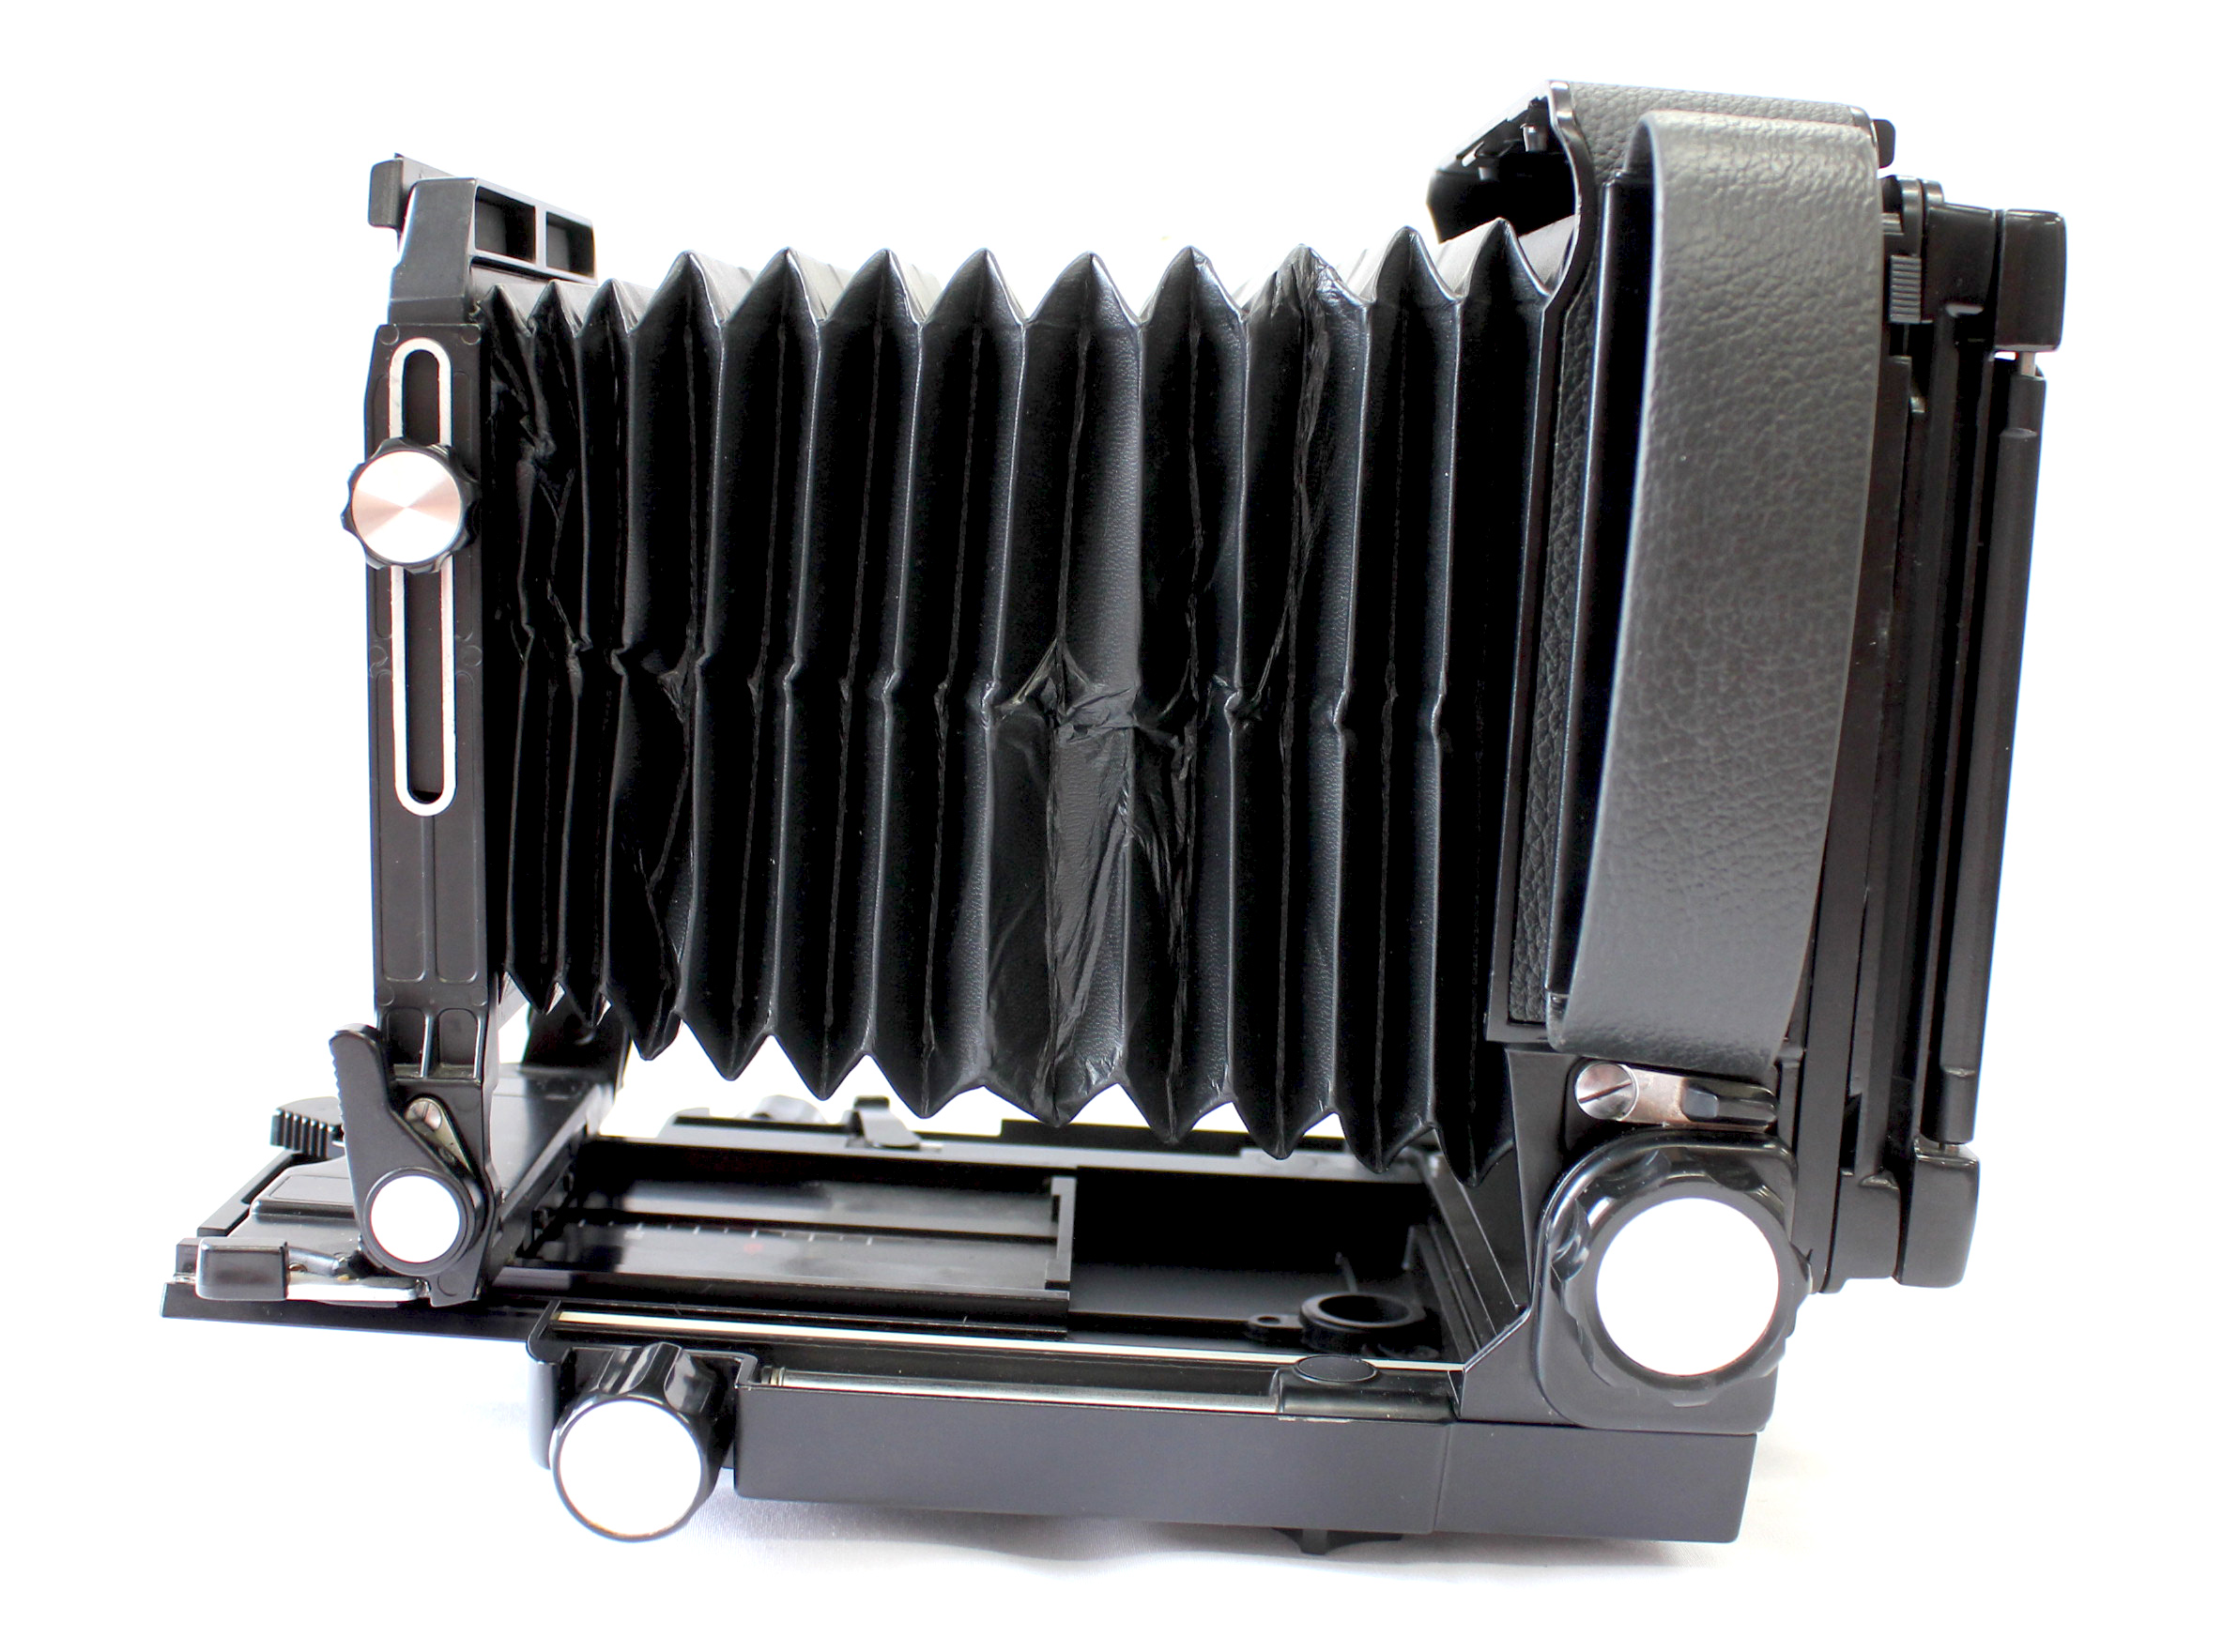  Toyo Field 45A 4x5 Large Format Film Camera with Revolving Back and 3 Cut Film Holders from Japan Photo 2